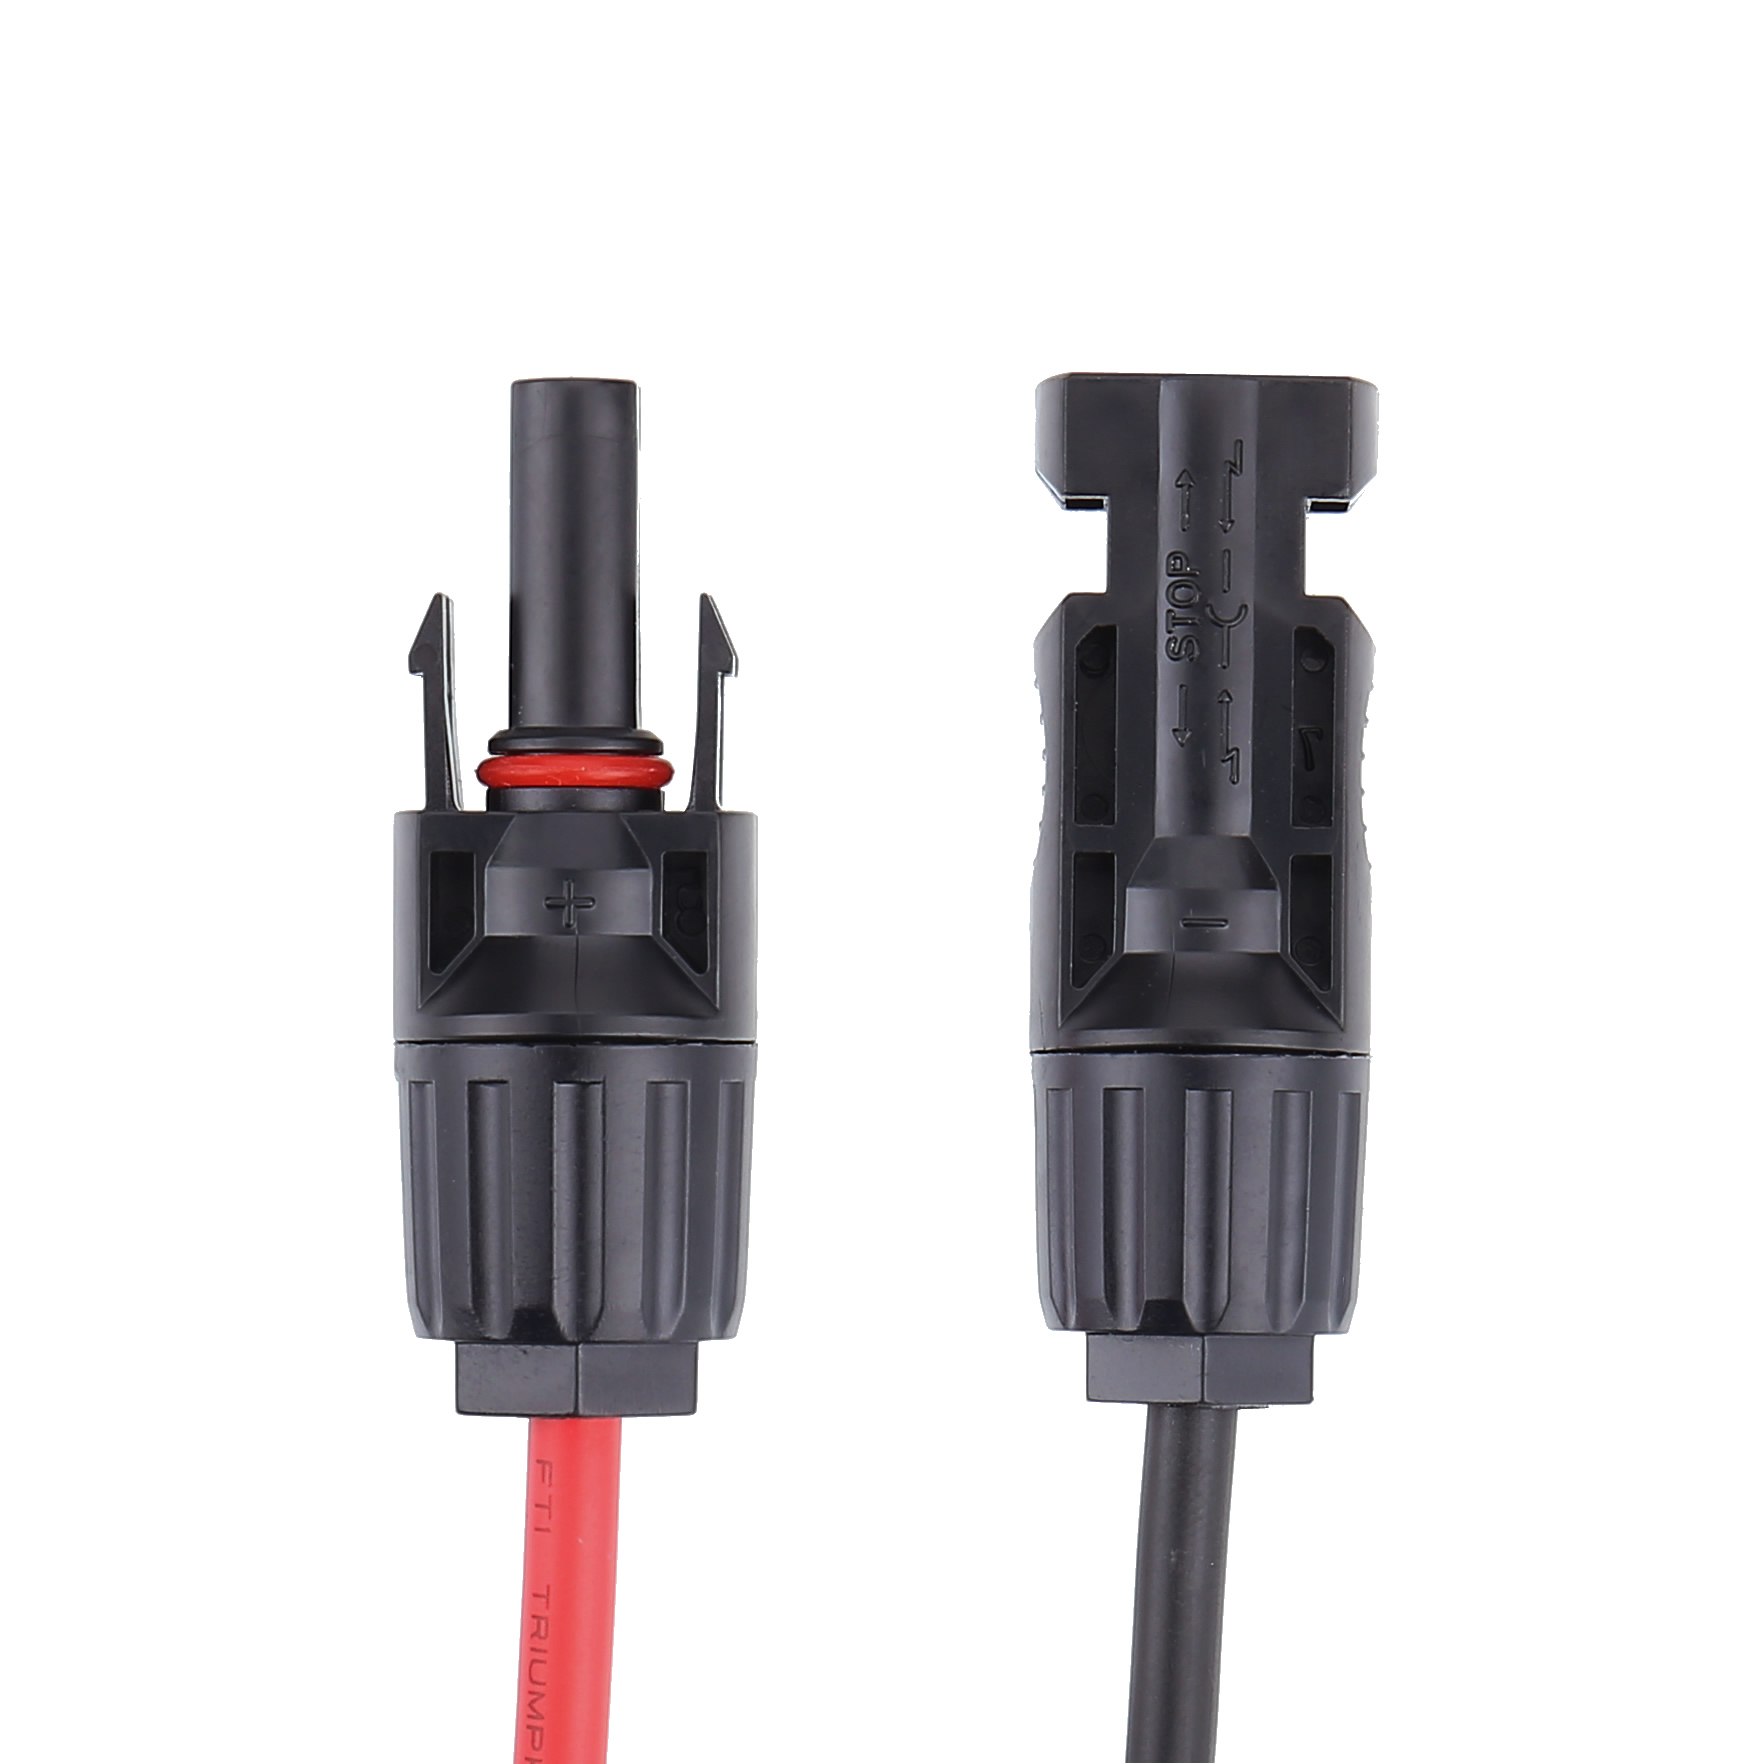 LIXINTIAN 10AWG 45A Connector to SAE Connector Cable,for Pre-Wired RV Boat Charge Battery Solar Panel with 1 SAE Polarity Reverse Connector-1.6ft/0.5m